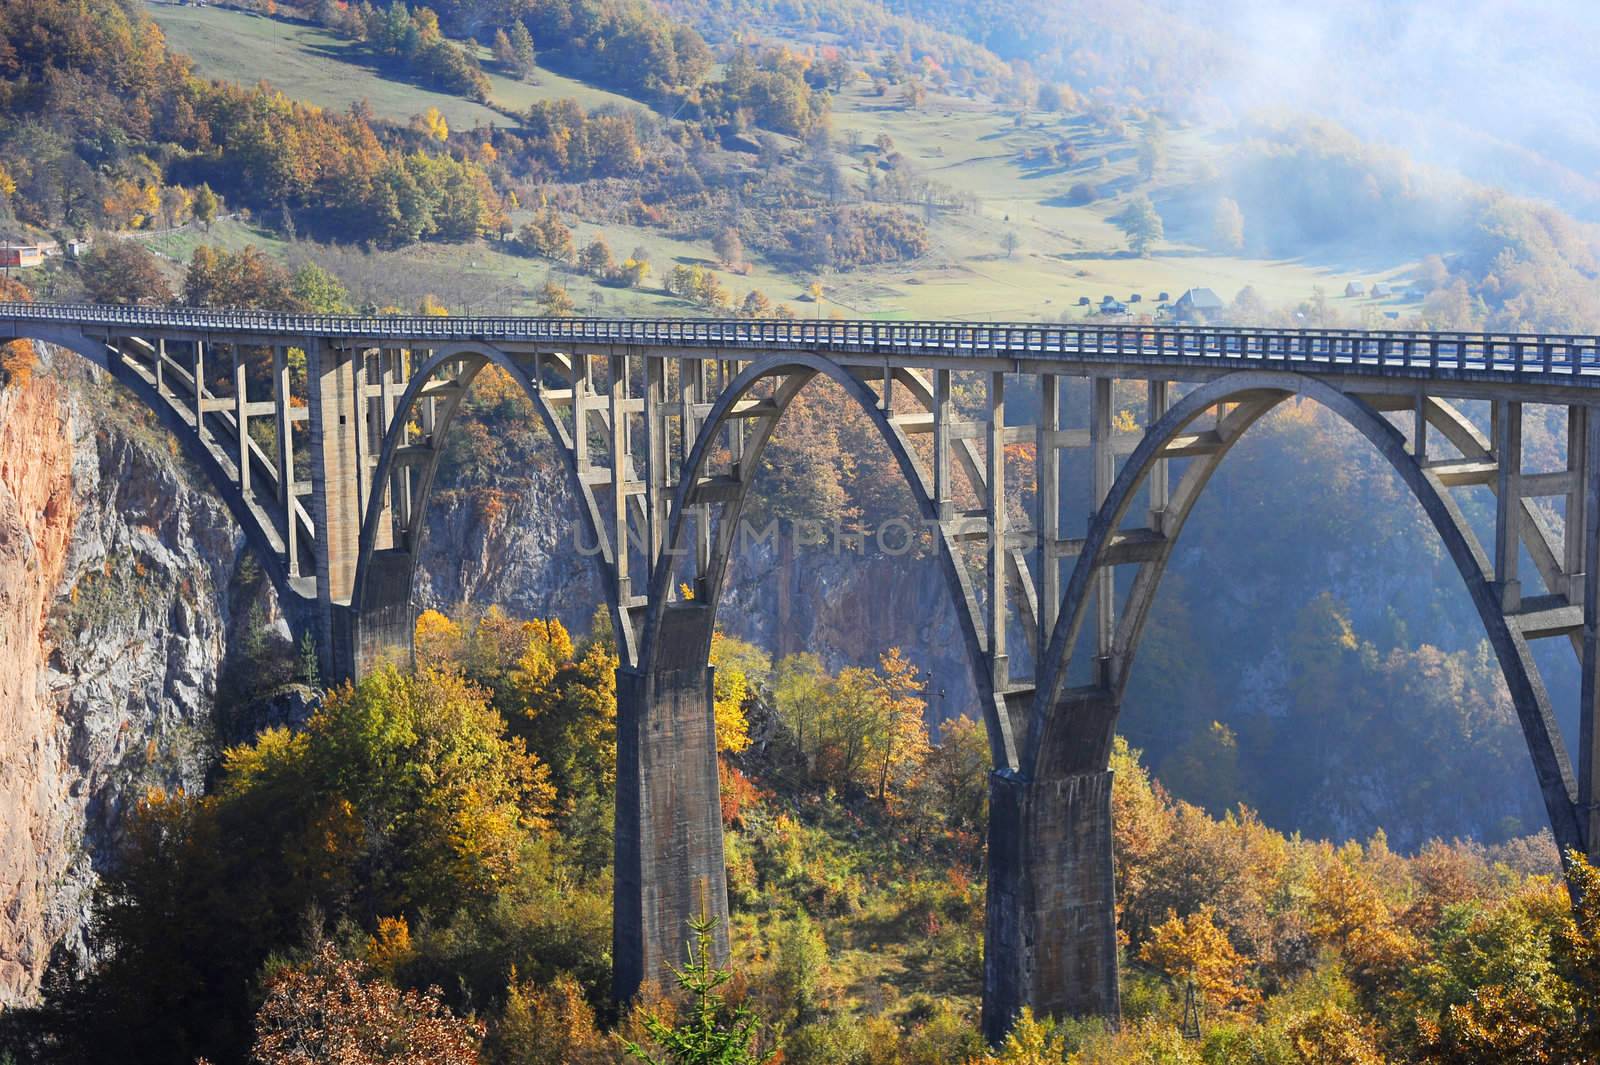 Djurdjevica Tara Bridge is a concrete arch bridge over the Tara River in northern Montenegro. It was built between 1937 and 1940, it's 365m long and the roadway stands 172 metres above the river.